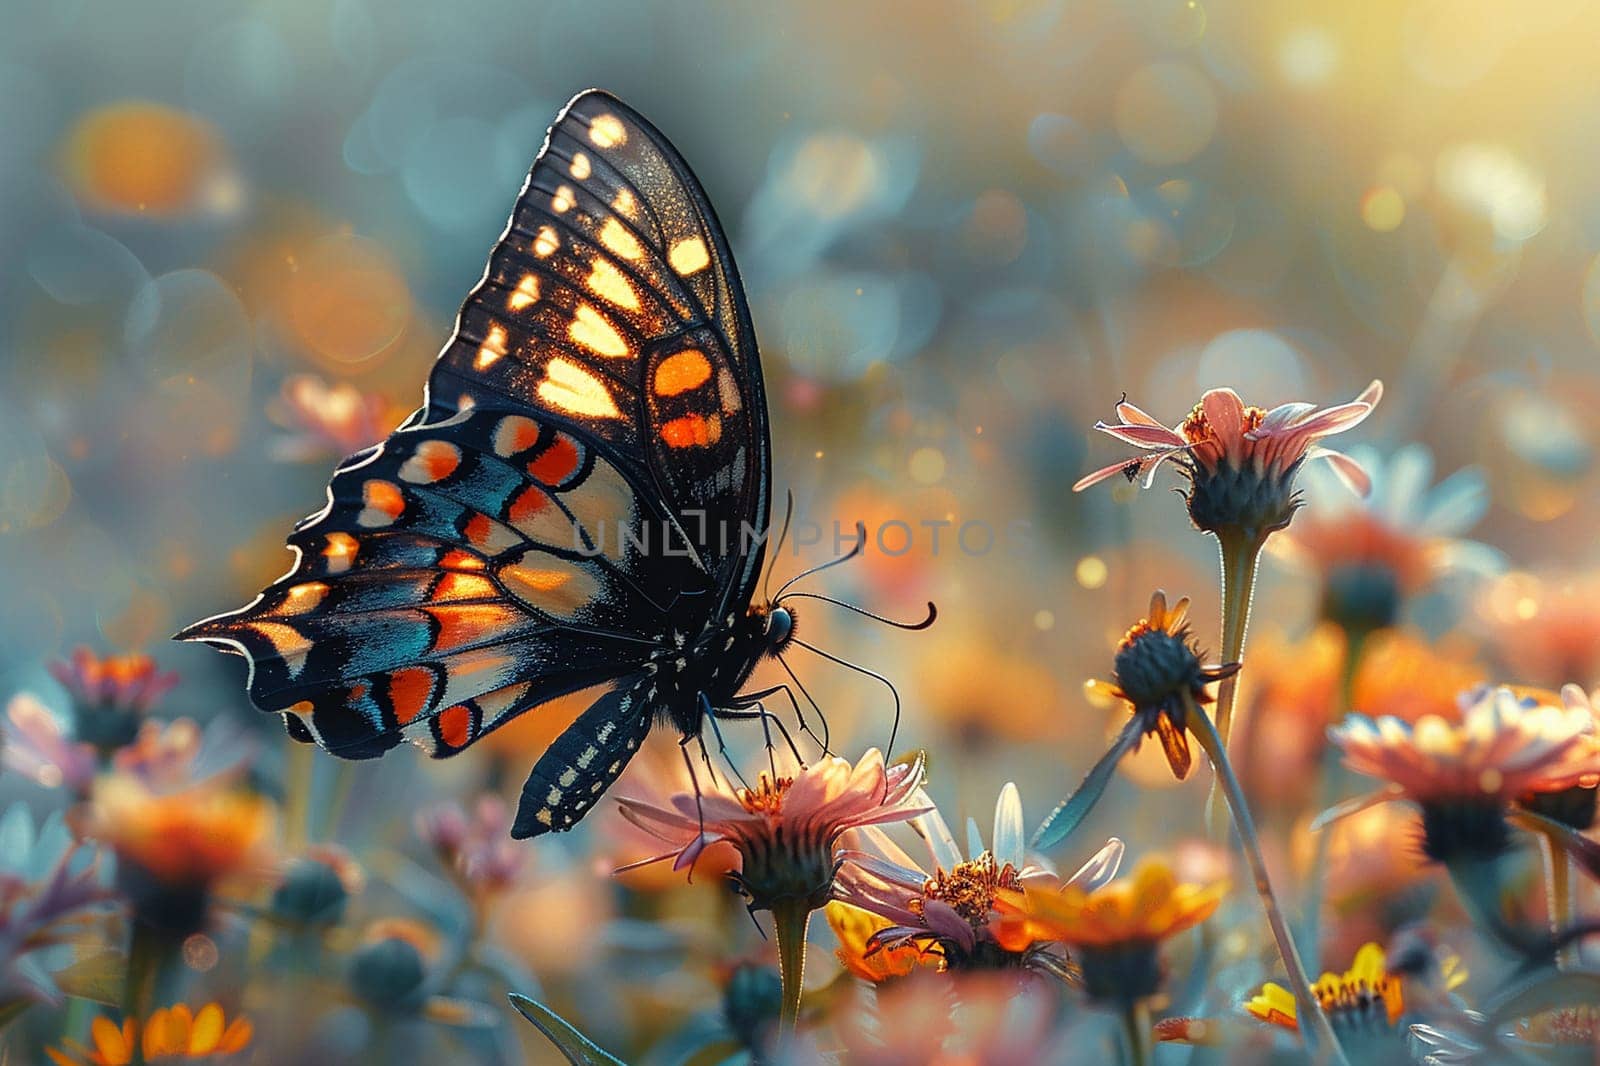 Fleeting Butterfly Landing on a Sun-Kissed Wildflower, The wings blur with petals, a dance of color and fleeting beauty.